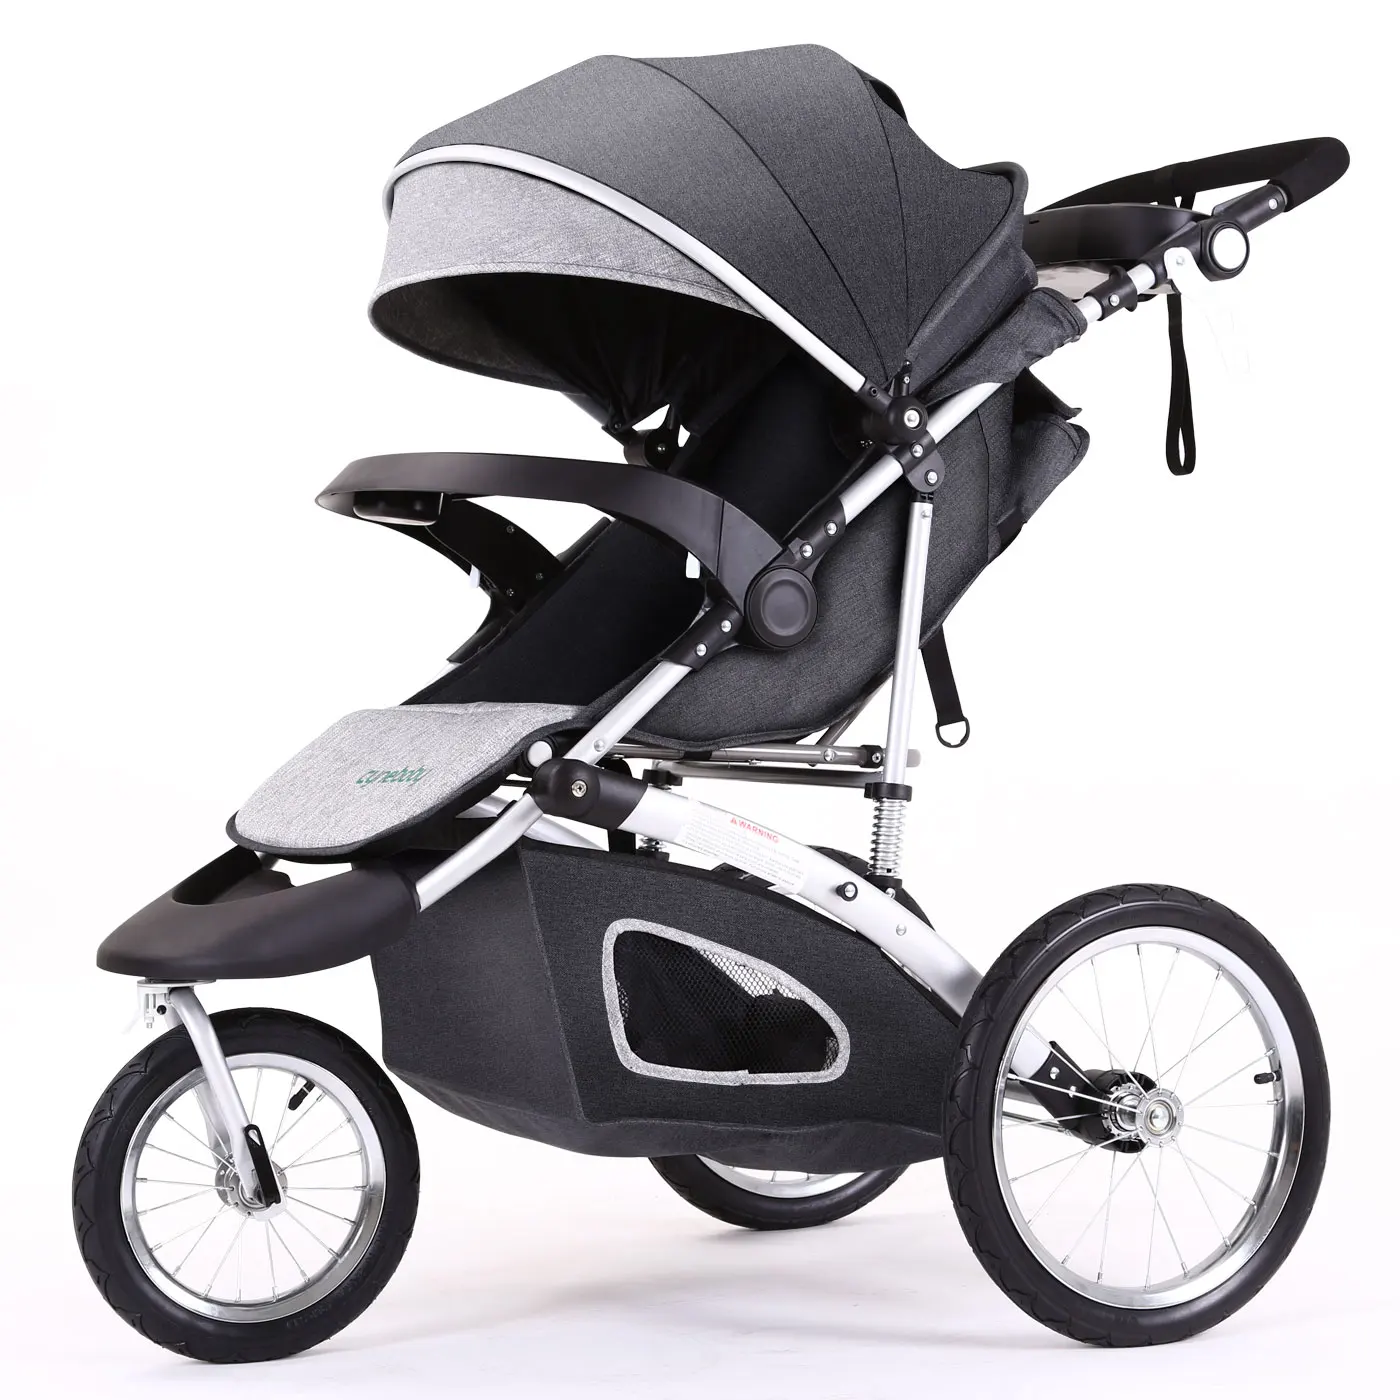 

Stroller Foldable Jogging Stroller Single Toddler Stroller Jogging Compact Ultra-light Stroller Can be Carried for Trave